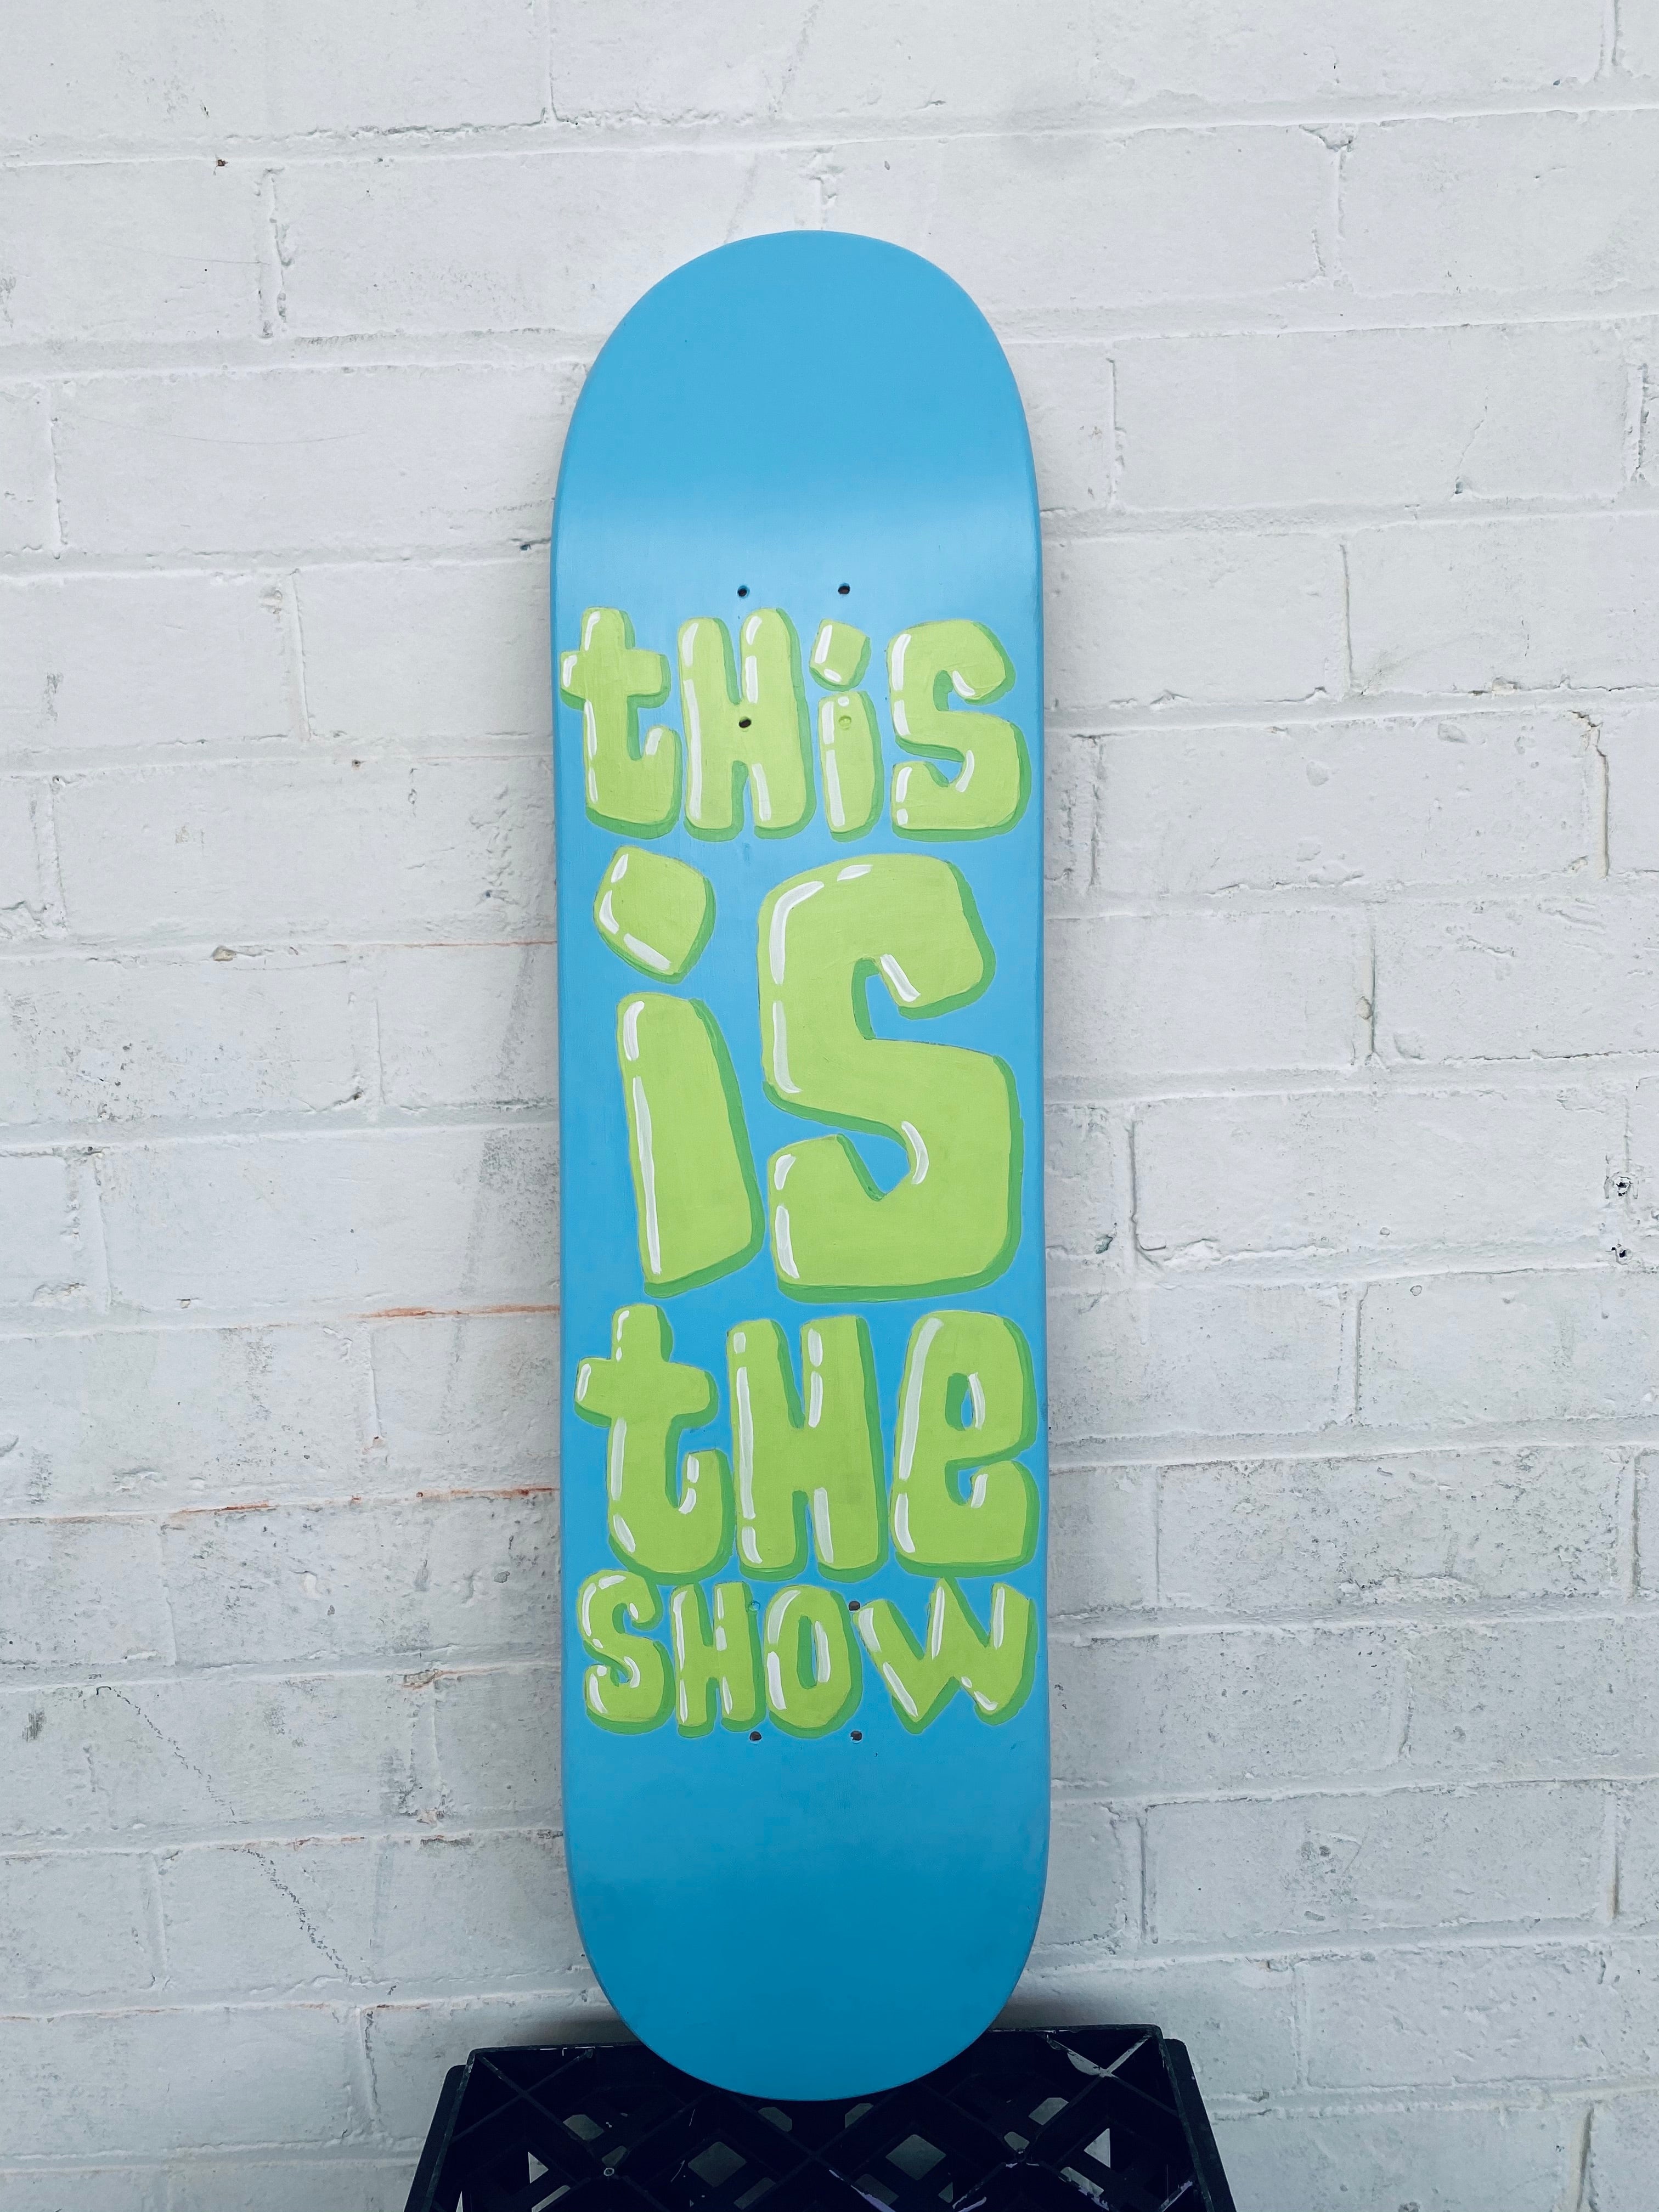 Original: This is the Show! Skateboard Art.